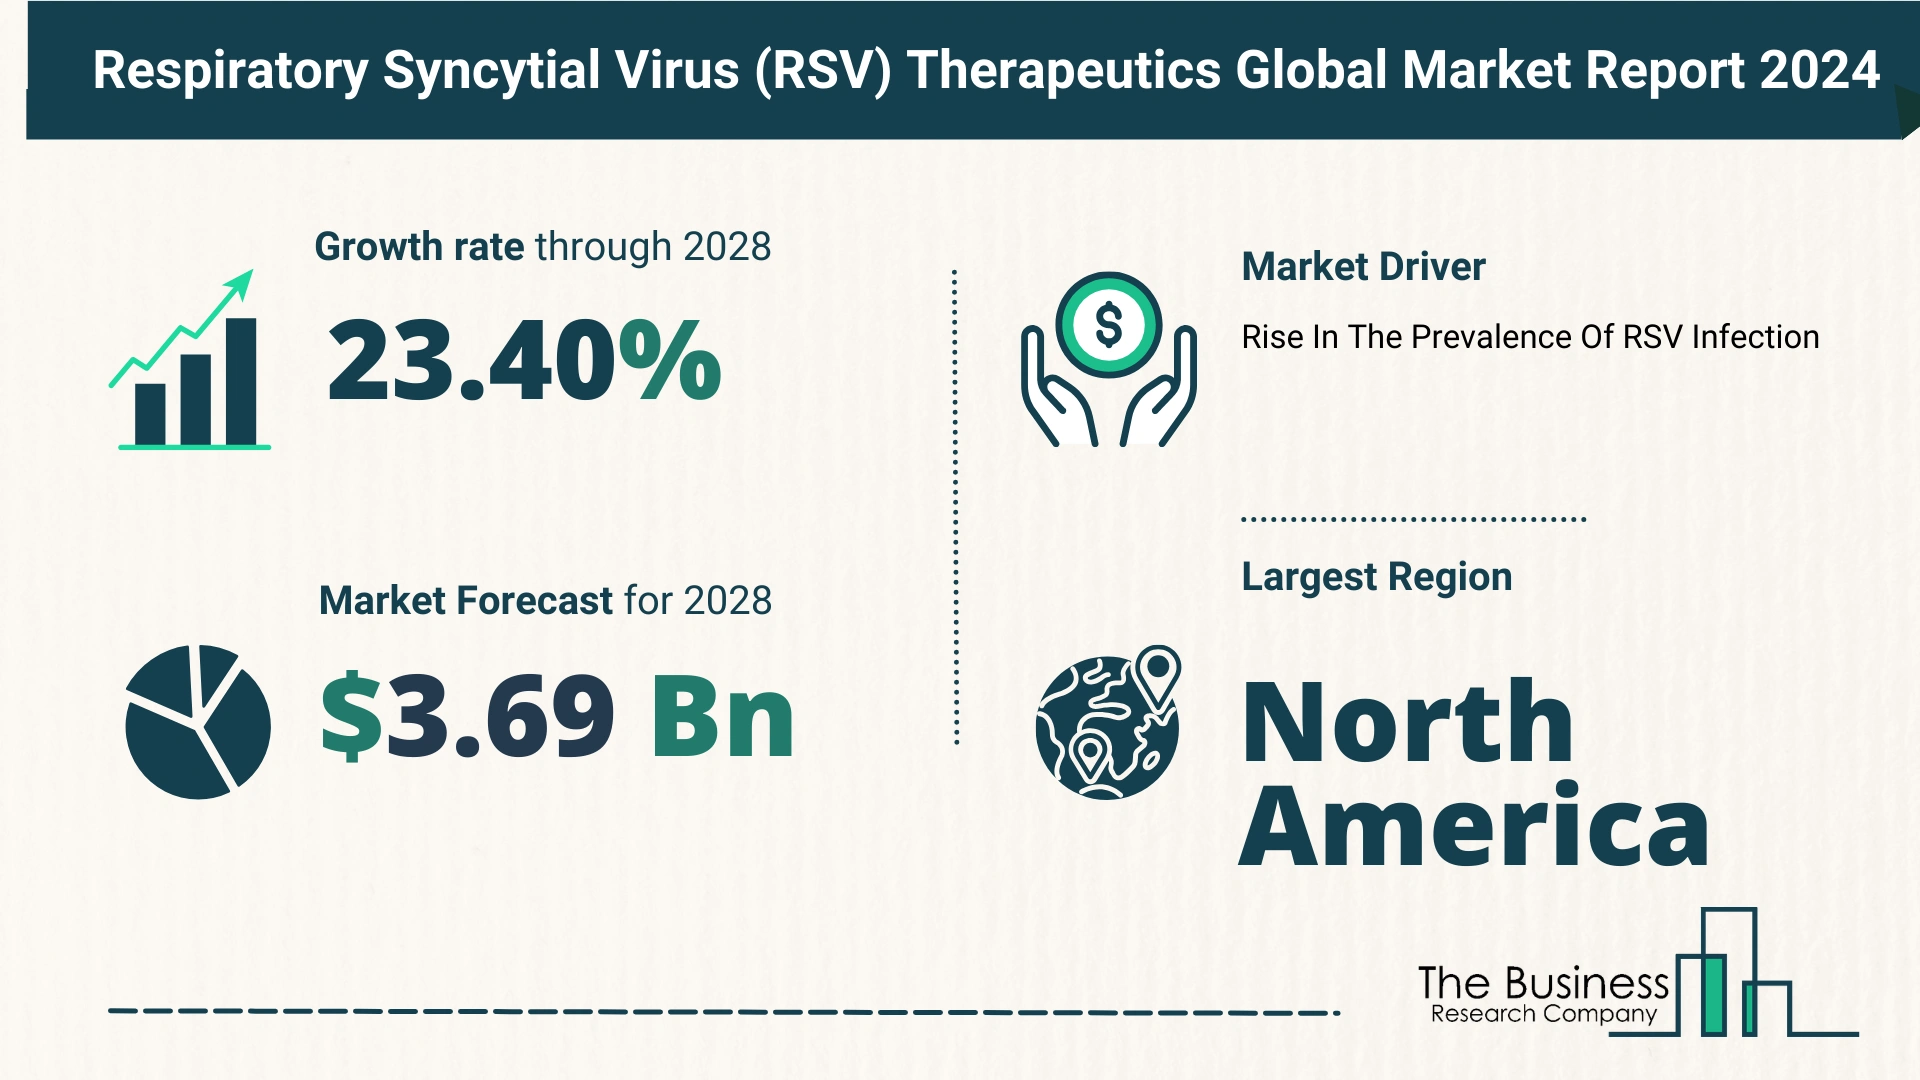 Global Respiratory Syncytial Virus (RSV) Therapeutics Market Size